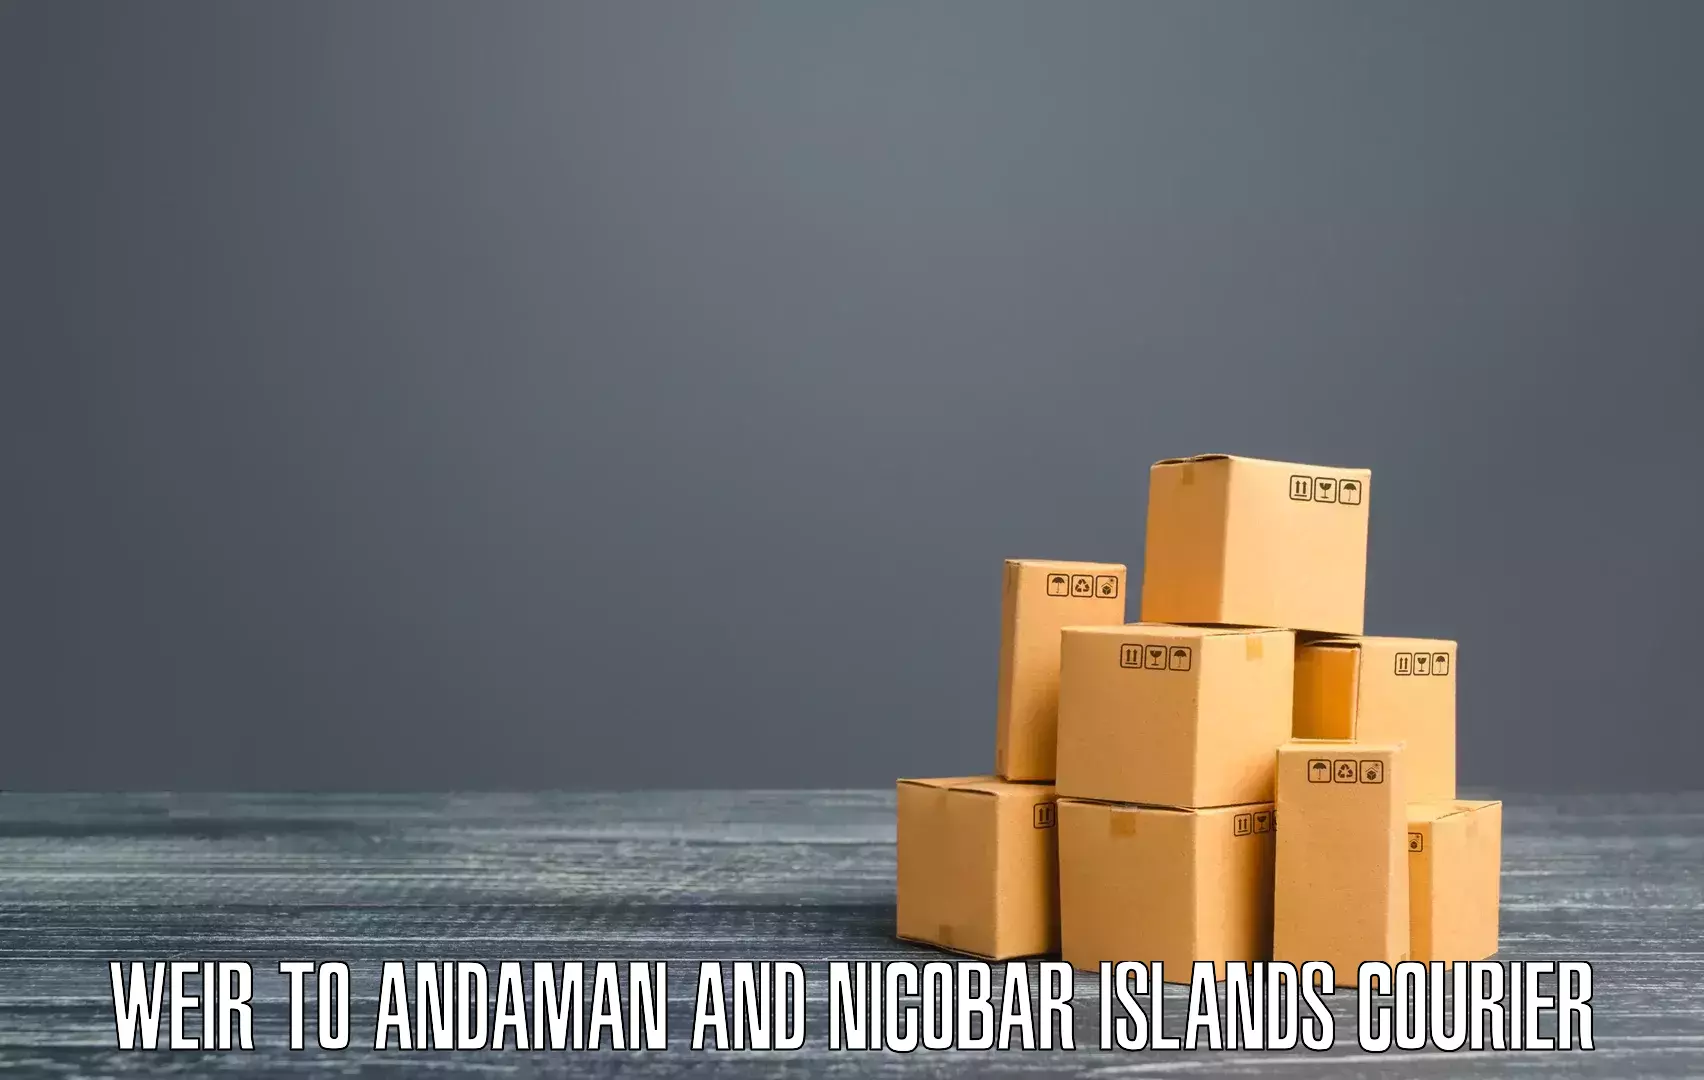 Nationwide shipping coverage Weir to Andaman and Nicobar Islands